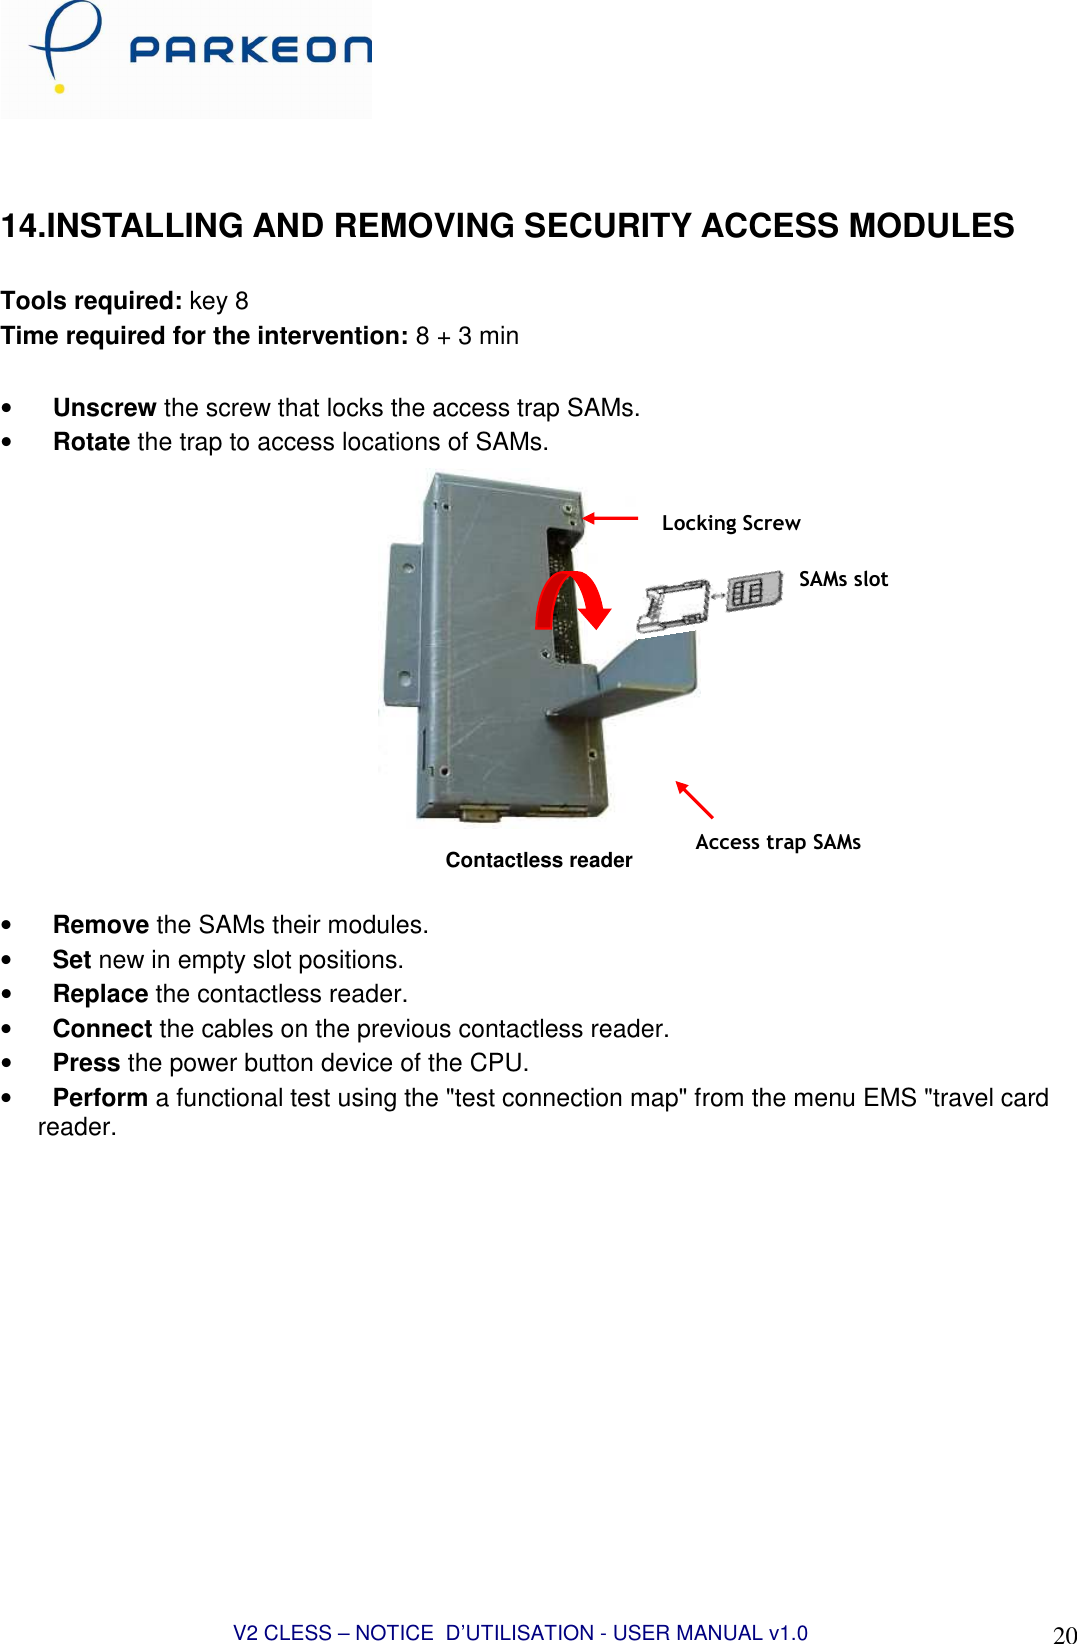  V2 CLESS – NOTICE  D’UTILISATION - USER MANUAL v1.0 20  14.INSTALLING AND REMOVING SECURITY ACCESS MODULES  Tools required: key 8 Time required for the intervention: 8 + 3 min  • Unscrew the screw that locks the access trap SAMs. • Rotate the trap to access locations of SAMs.  Contactless reader  • Remove the SAMs their modules. • Set new in empty slot positions. • Replace the contactless reader. • Connect the cables on the previous contactless reader. • Press the power button device of the CPU. • Perform a functional test using the &quot;test connection map&quot; from the menu EMS &quot;travel card reader.  SAMs slot Locking Screw Access trap SAMs 